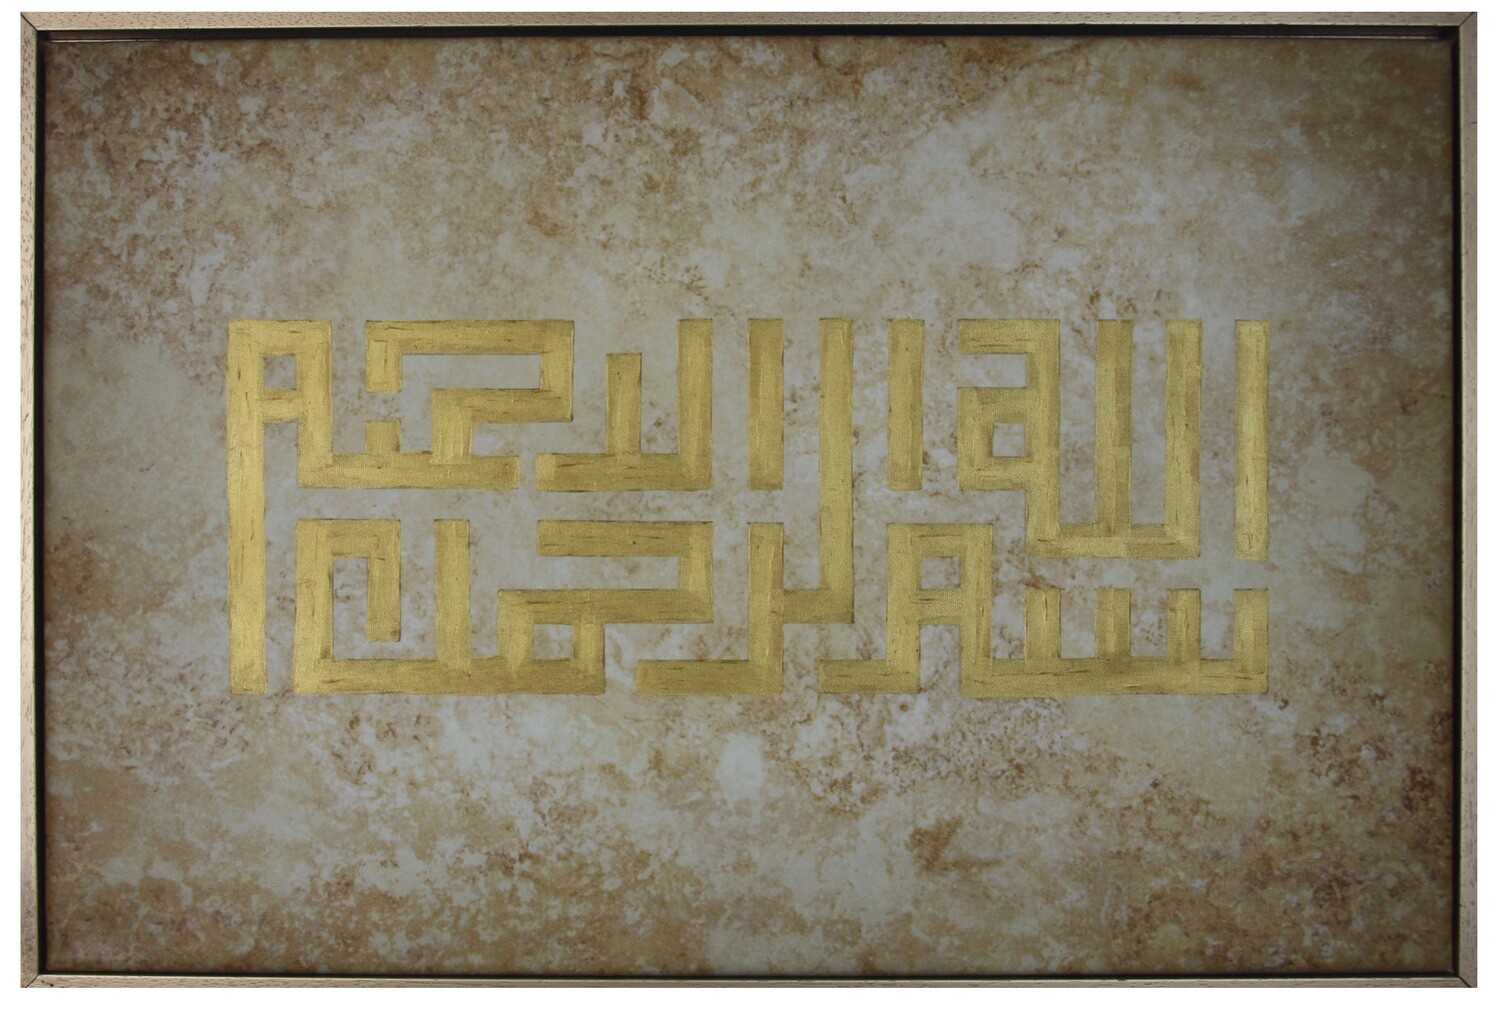 Bismillah Gold Kufic Abstract Stone Design Original Hand painted Canvas in Gold Frame